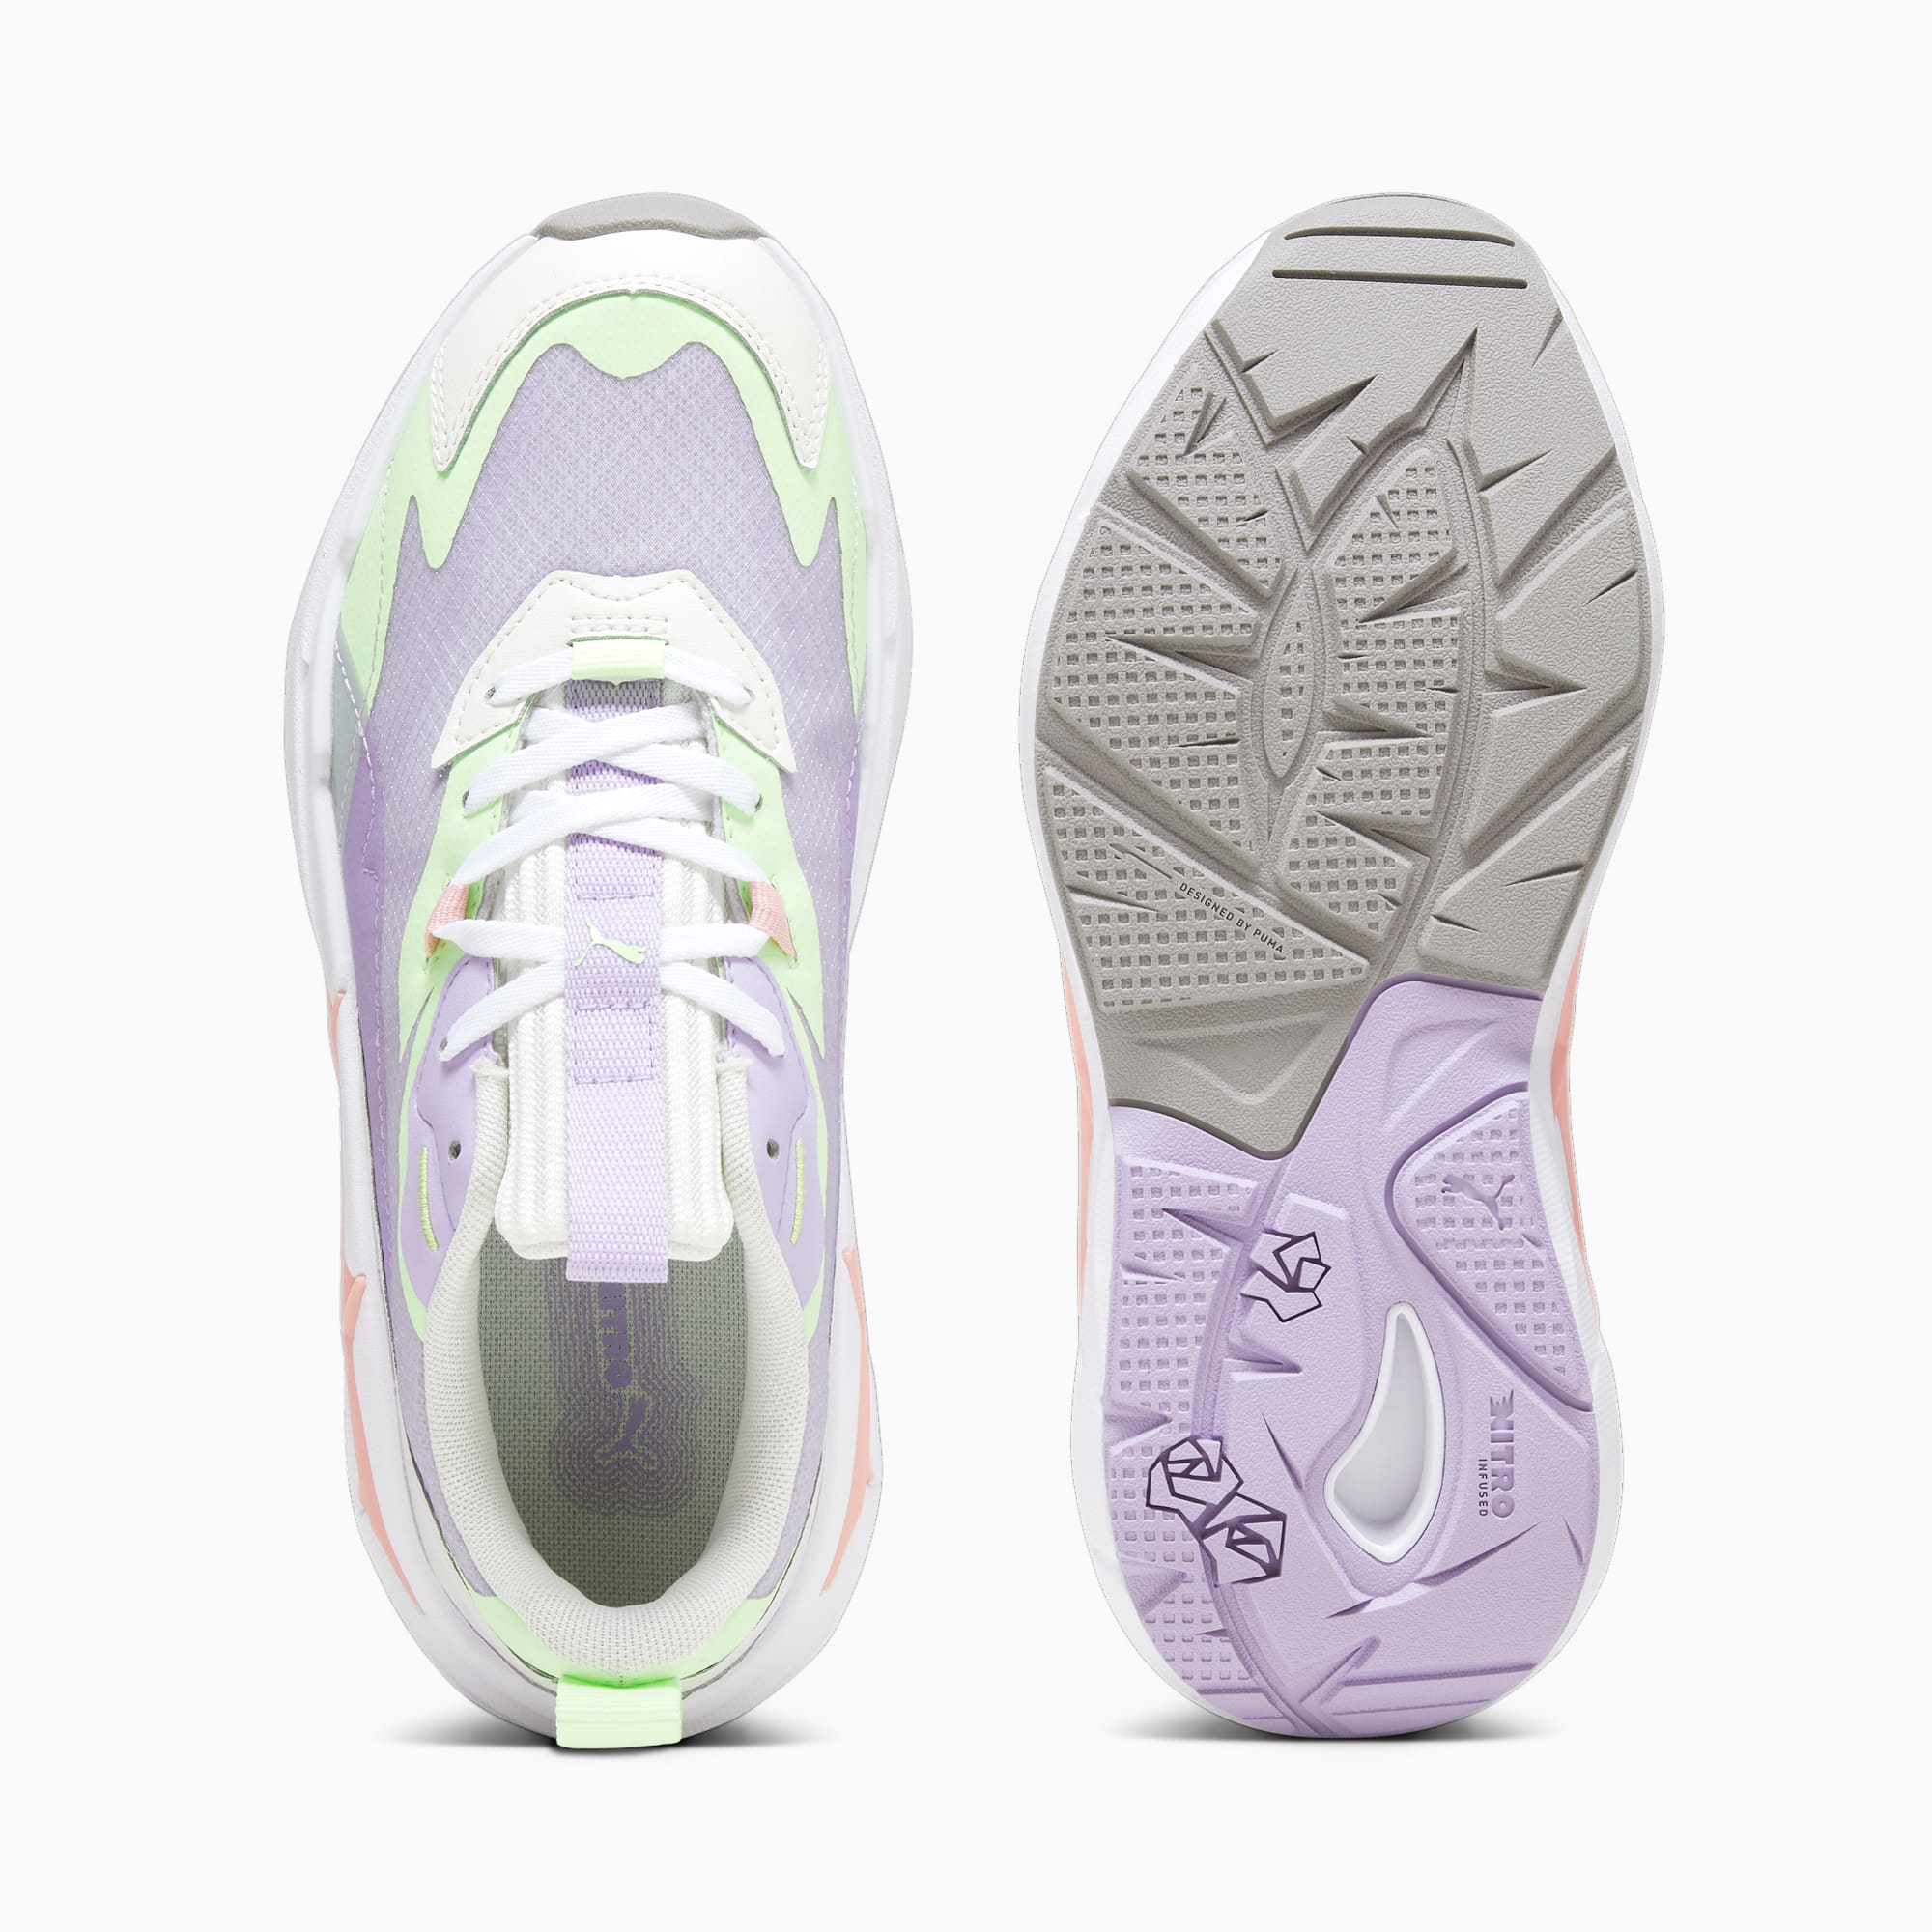 PUMA Spina Nitro Women's Sneakers, Spring Lavender/Speed Green, Size 35,5, Shoes